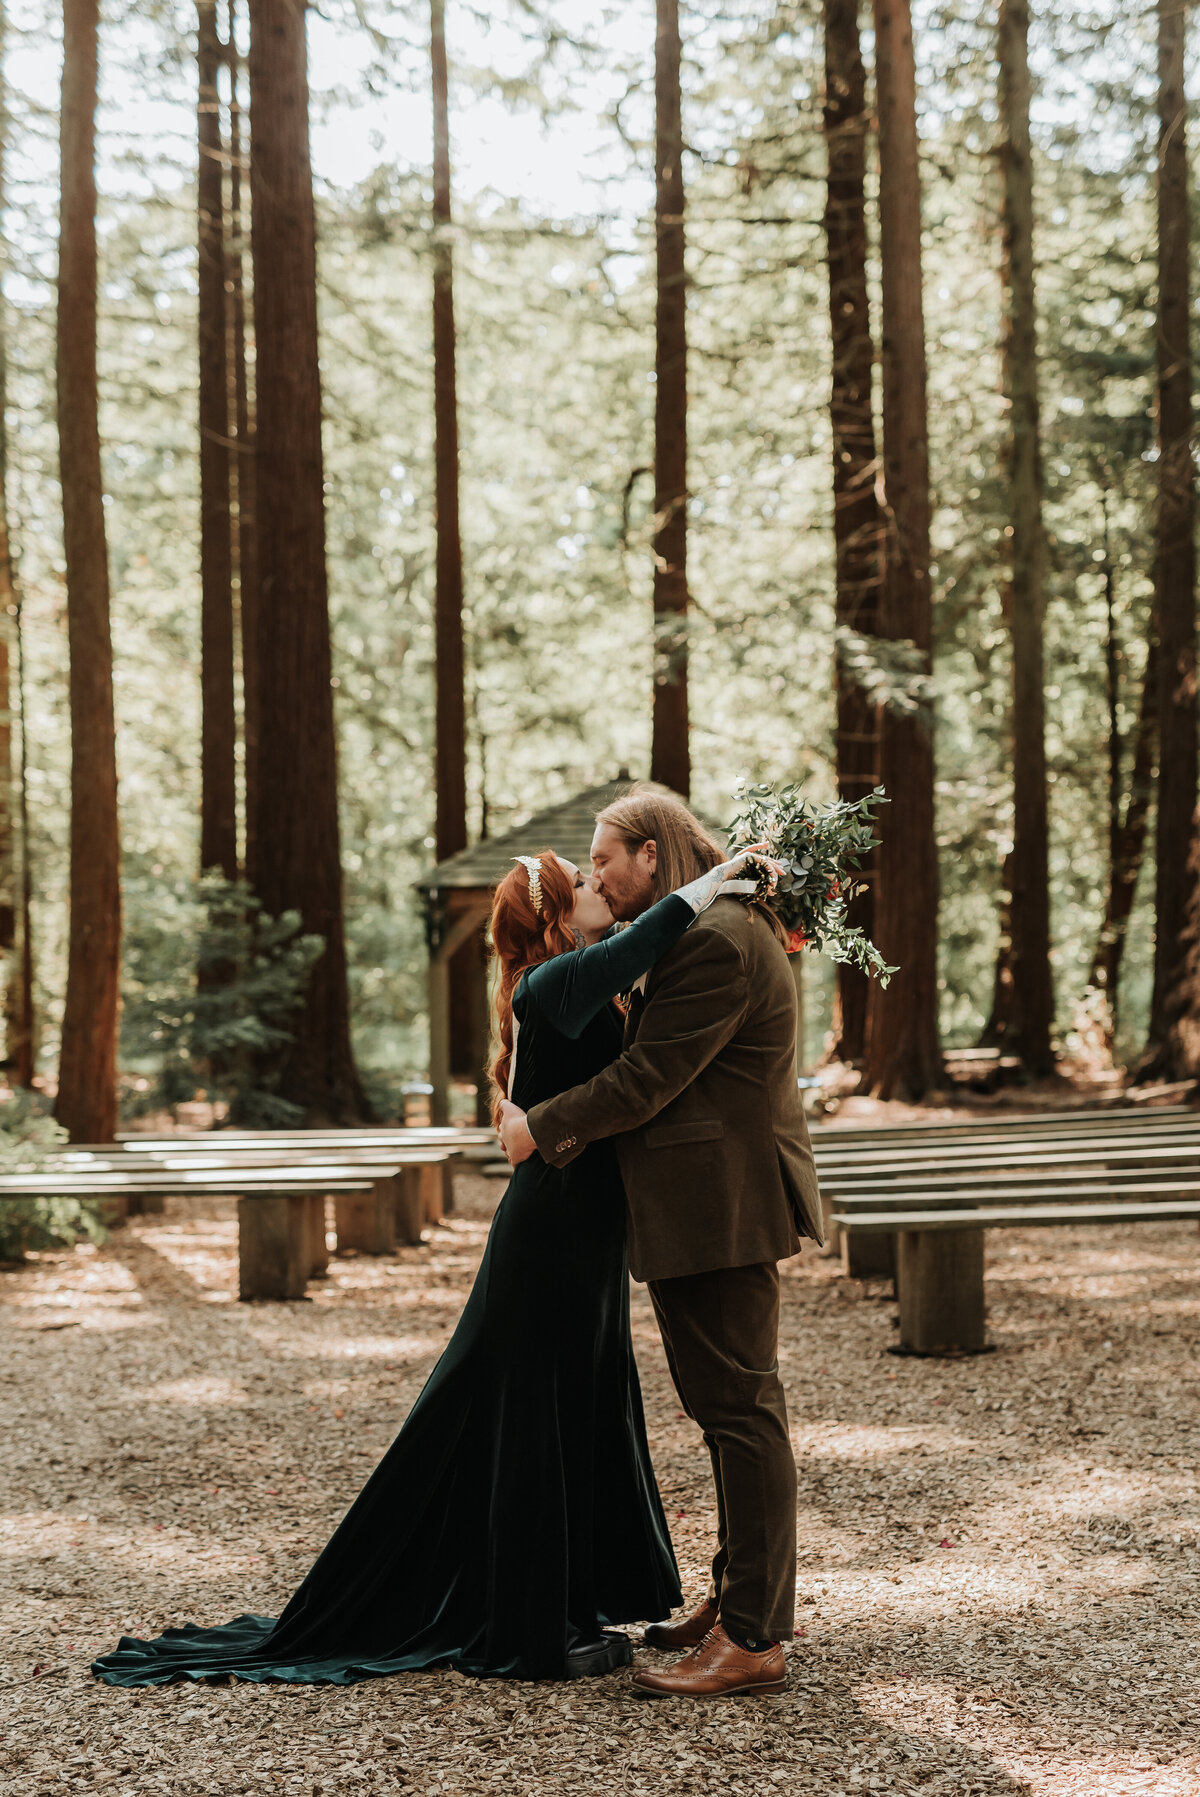 Bride and Groom kiss in the Redwoods at their relaxed forest wedding at Two Woods Estate